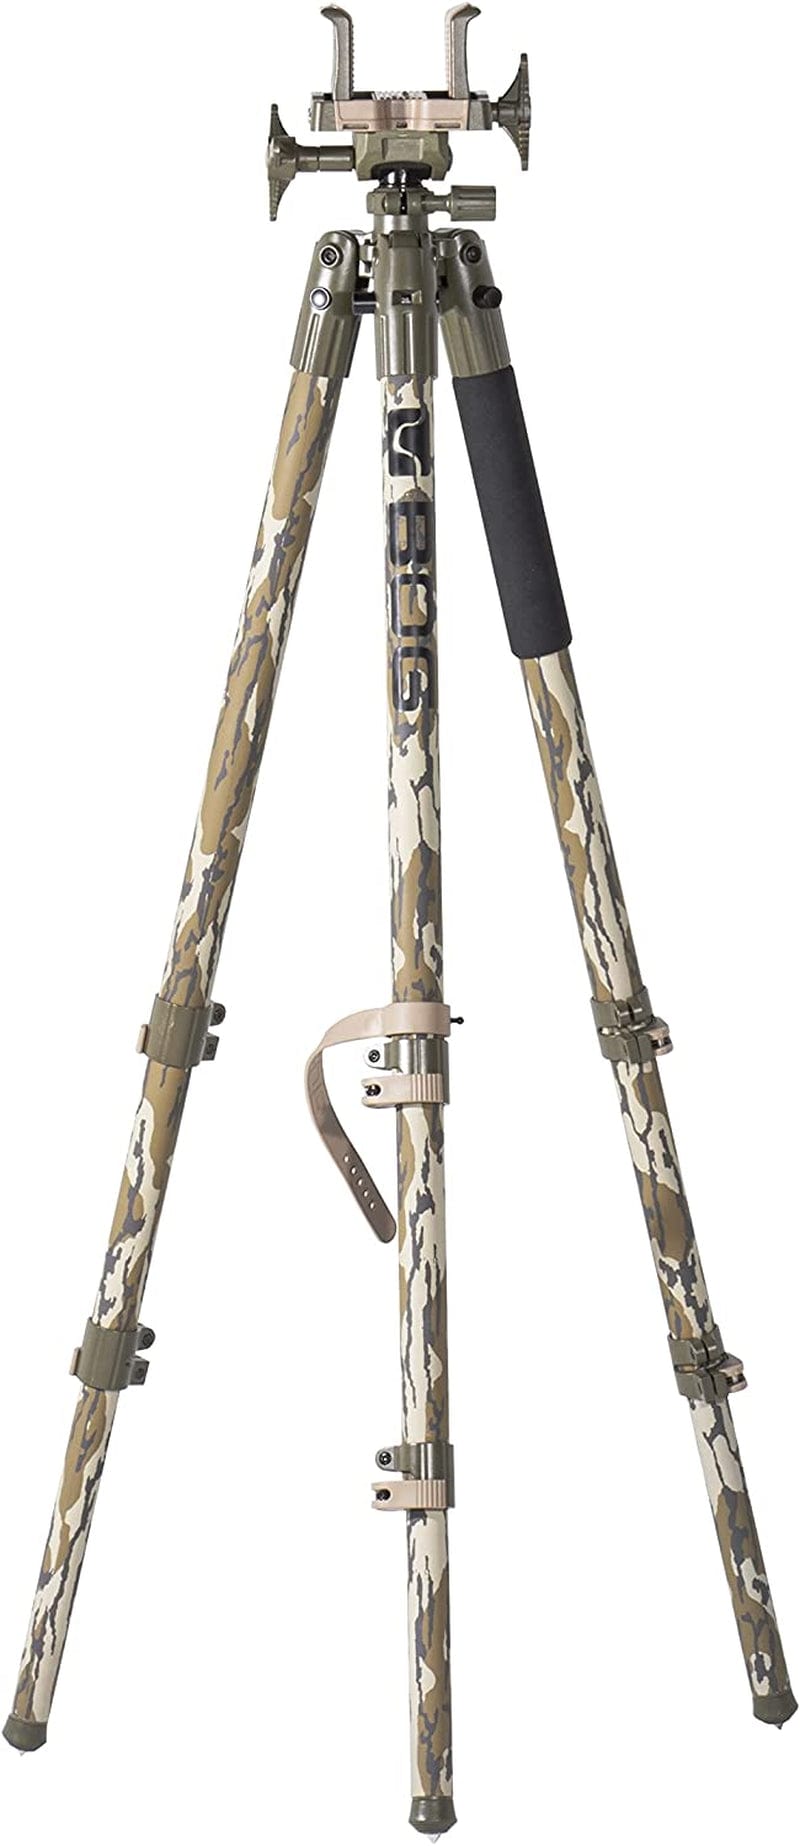 BOG Deathgrip Tripods with Durable Aluminum and Carbon Fiber Frames, Lightweight, Stable Design, Bubble Level, Adjustable Legs, and Hands-Free Operation for Hunting, Shooting, and Outdoors Sporting Goods > Outdoor Recreation > Winter Sports & Activities BOG Mossy Oak Bottomland Camo Tripod 